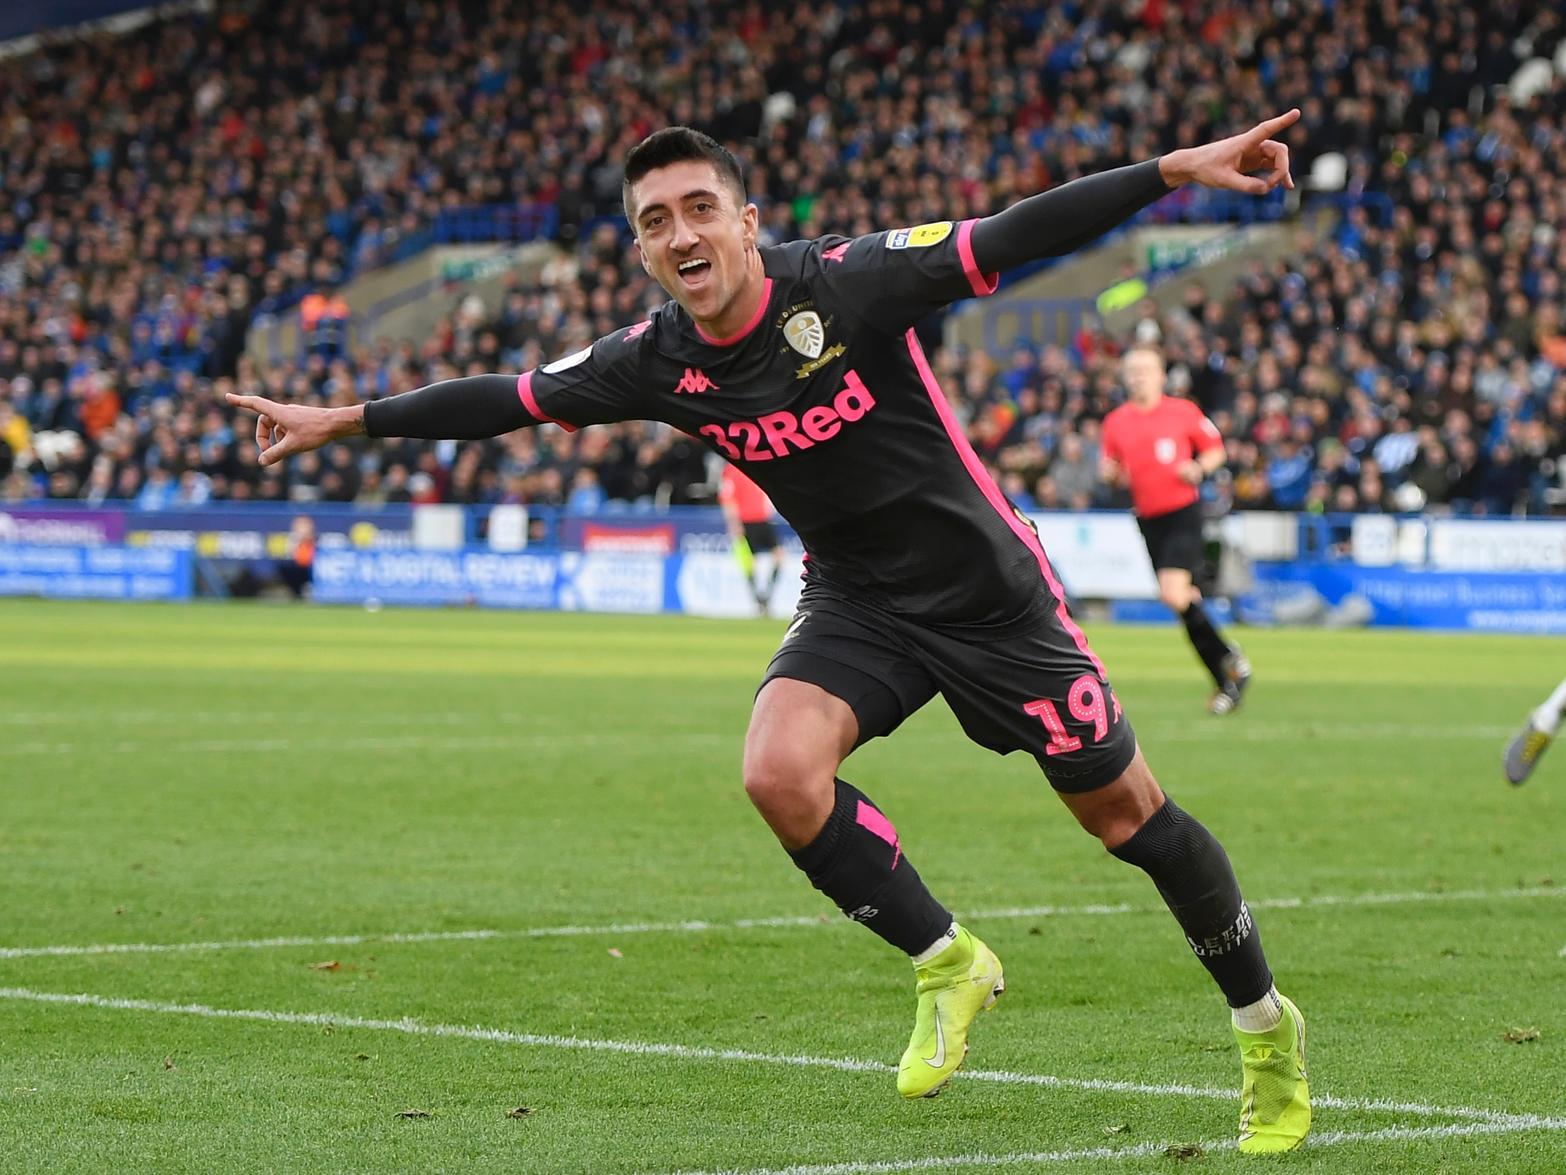 Ex-footballer Darren Bent has suggested that Leeds United will look to sign a creative midfielder in January, as they look to find a reliable backup option for veteran Pablo Hernandez. (Football Insider)